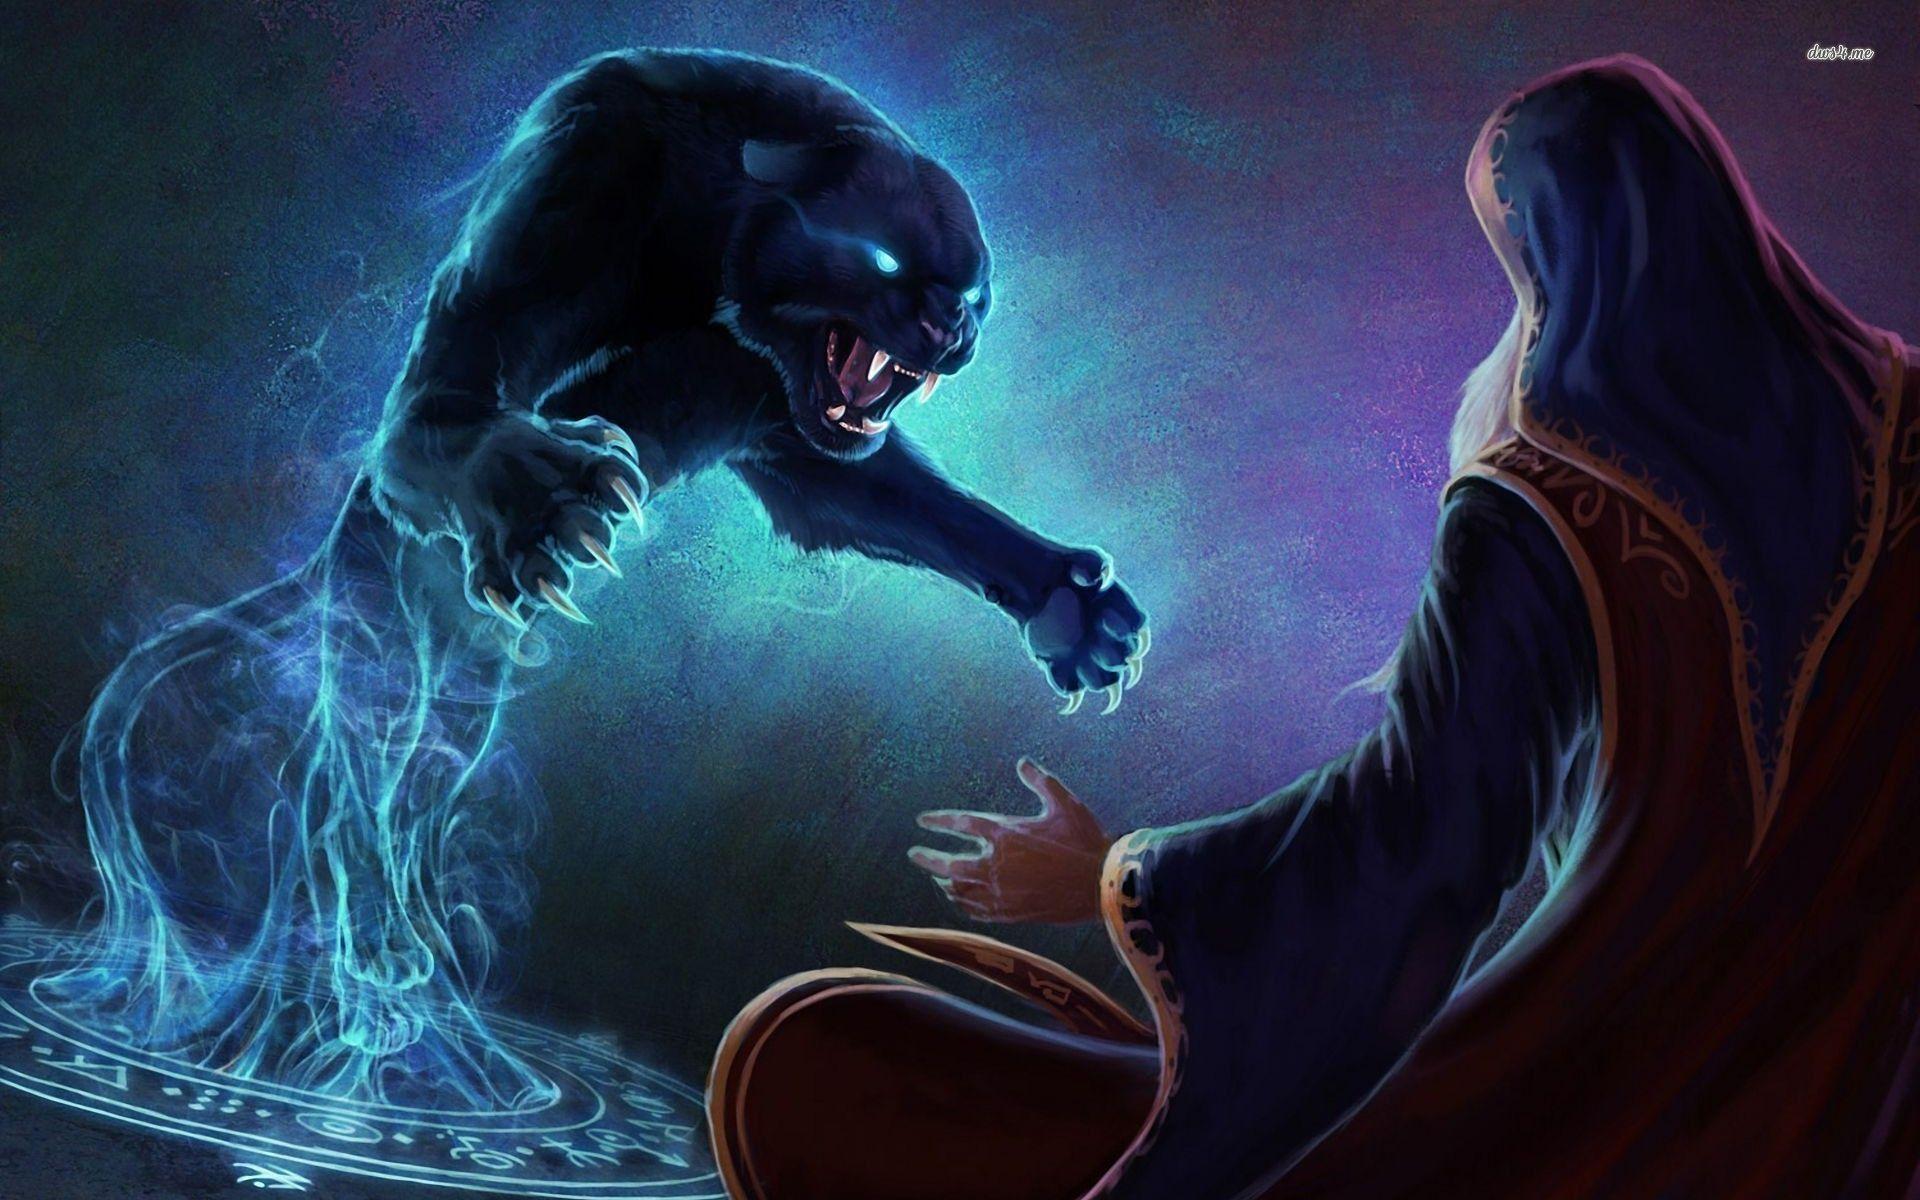 Panther attacking the mage wallpaper wallpaper - #